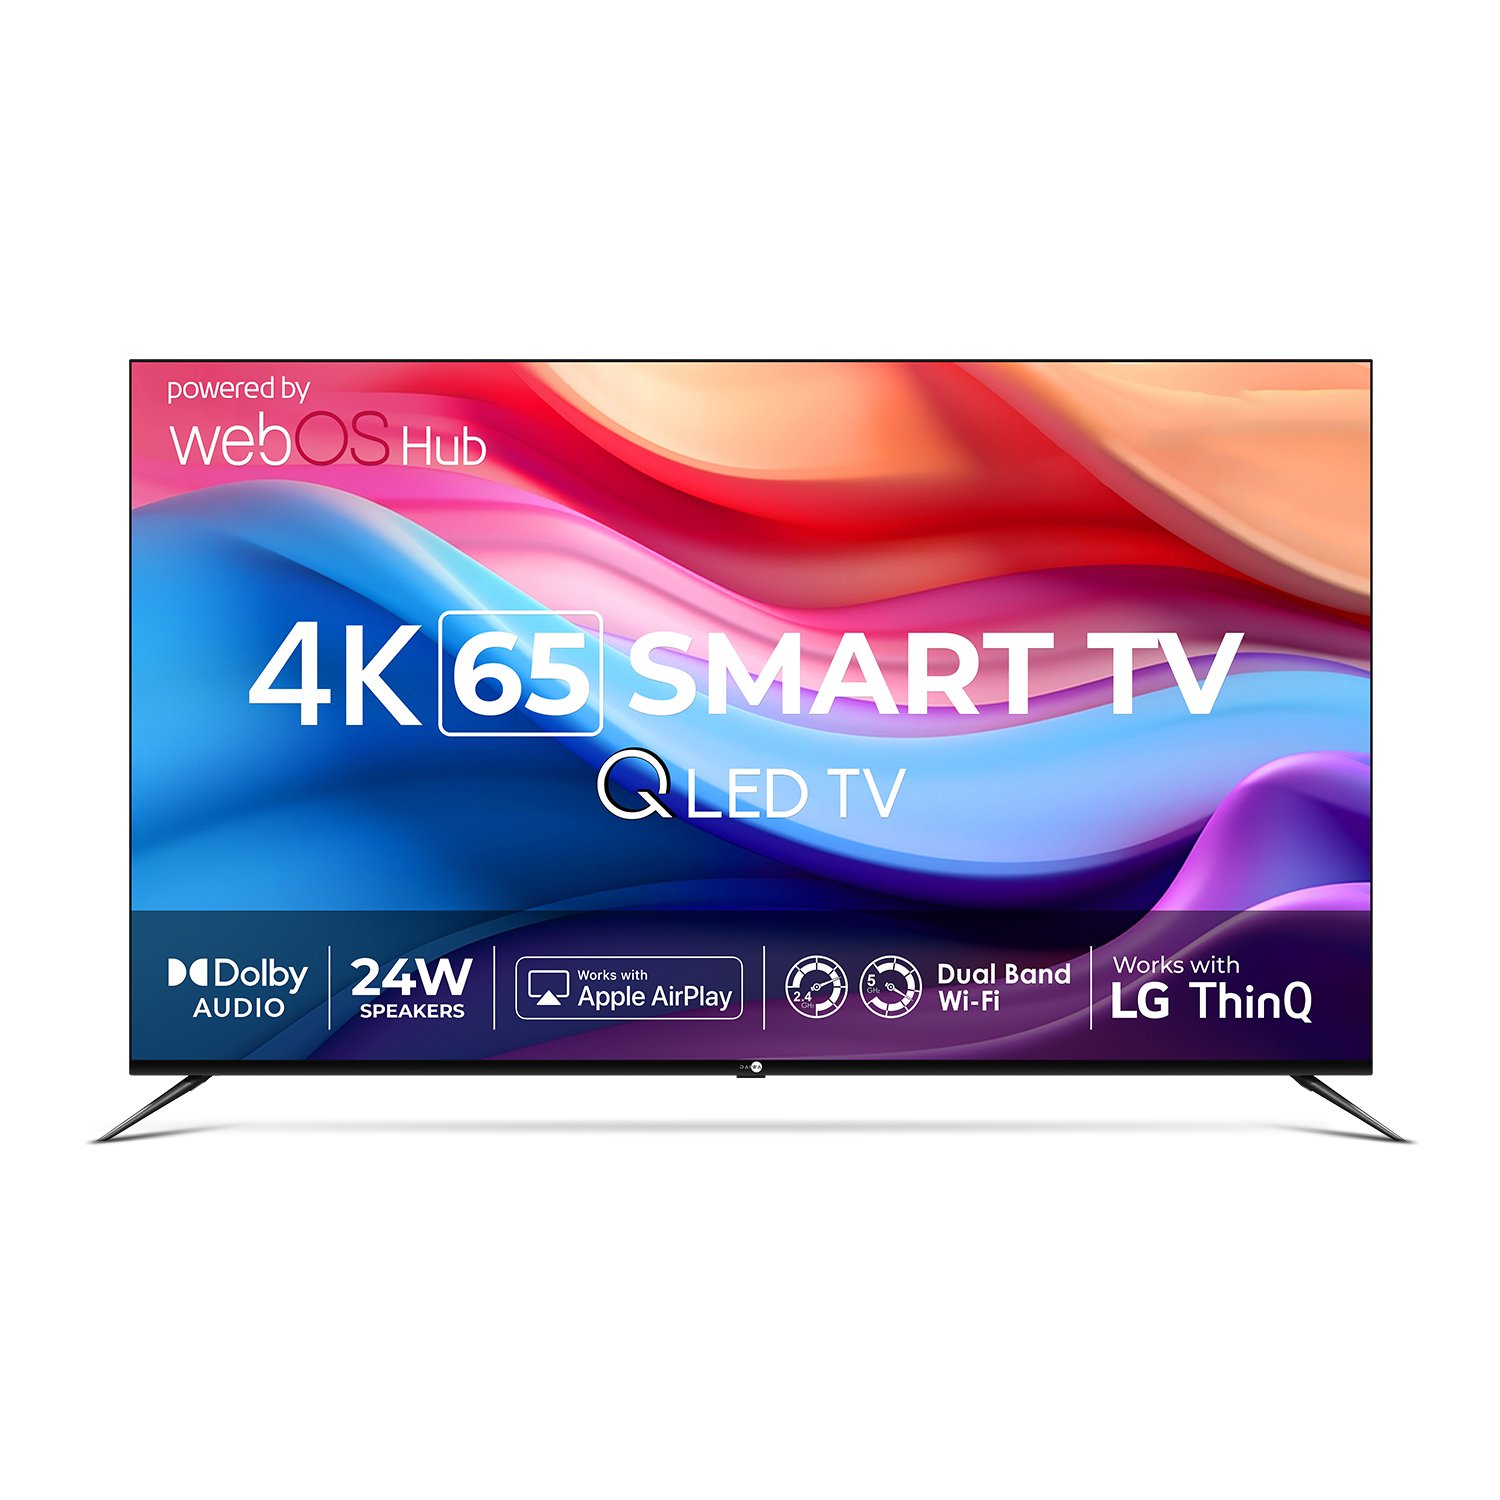 Daiwa Launches Premium 4K QLED TVs Powered by webOS Hub 2.0, Available Exclusively on Flipkart